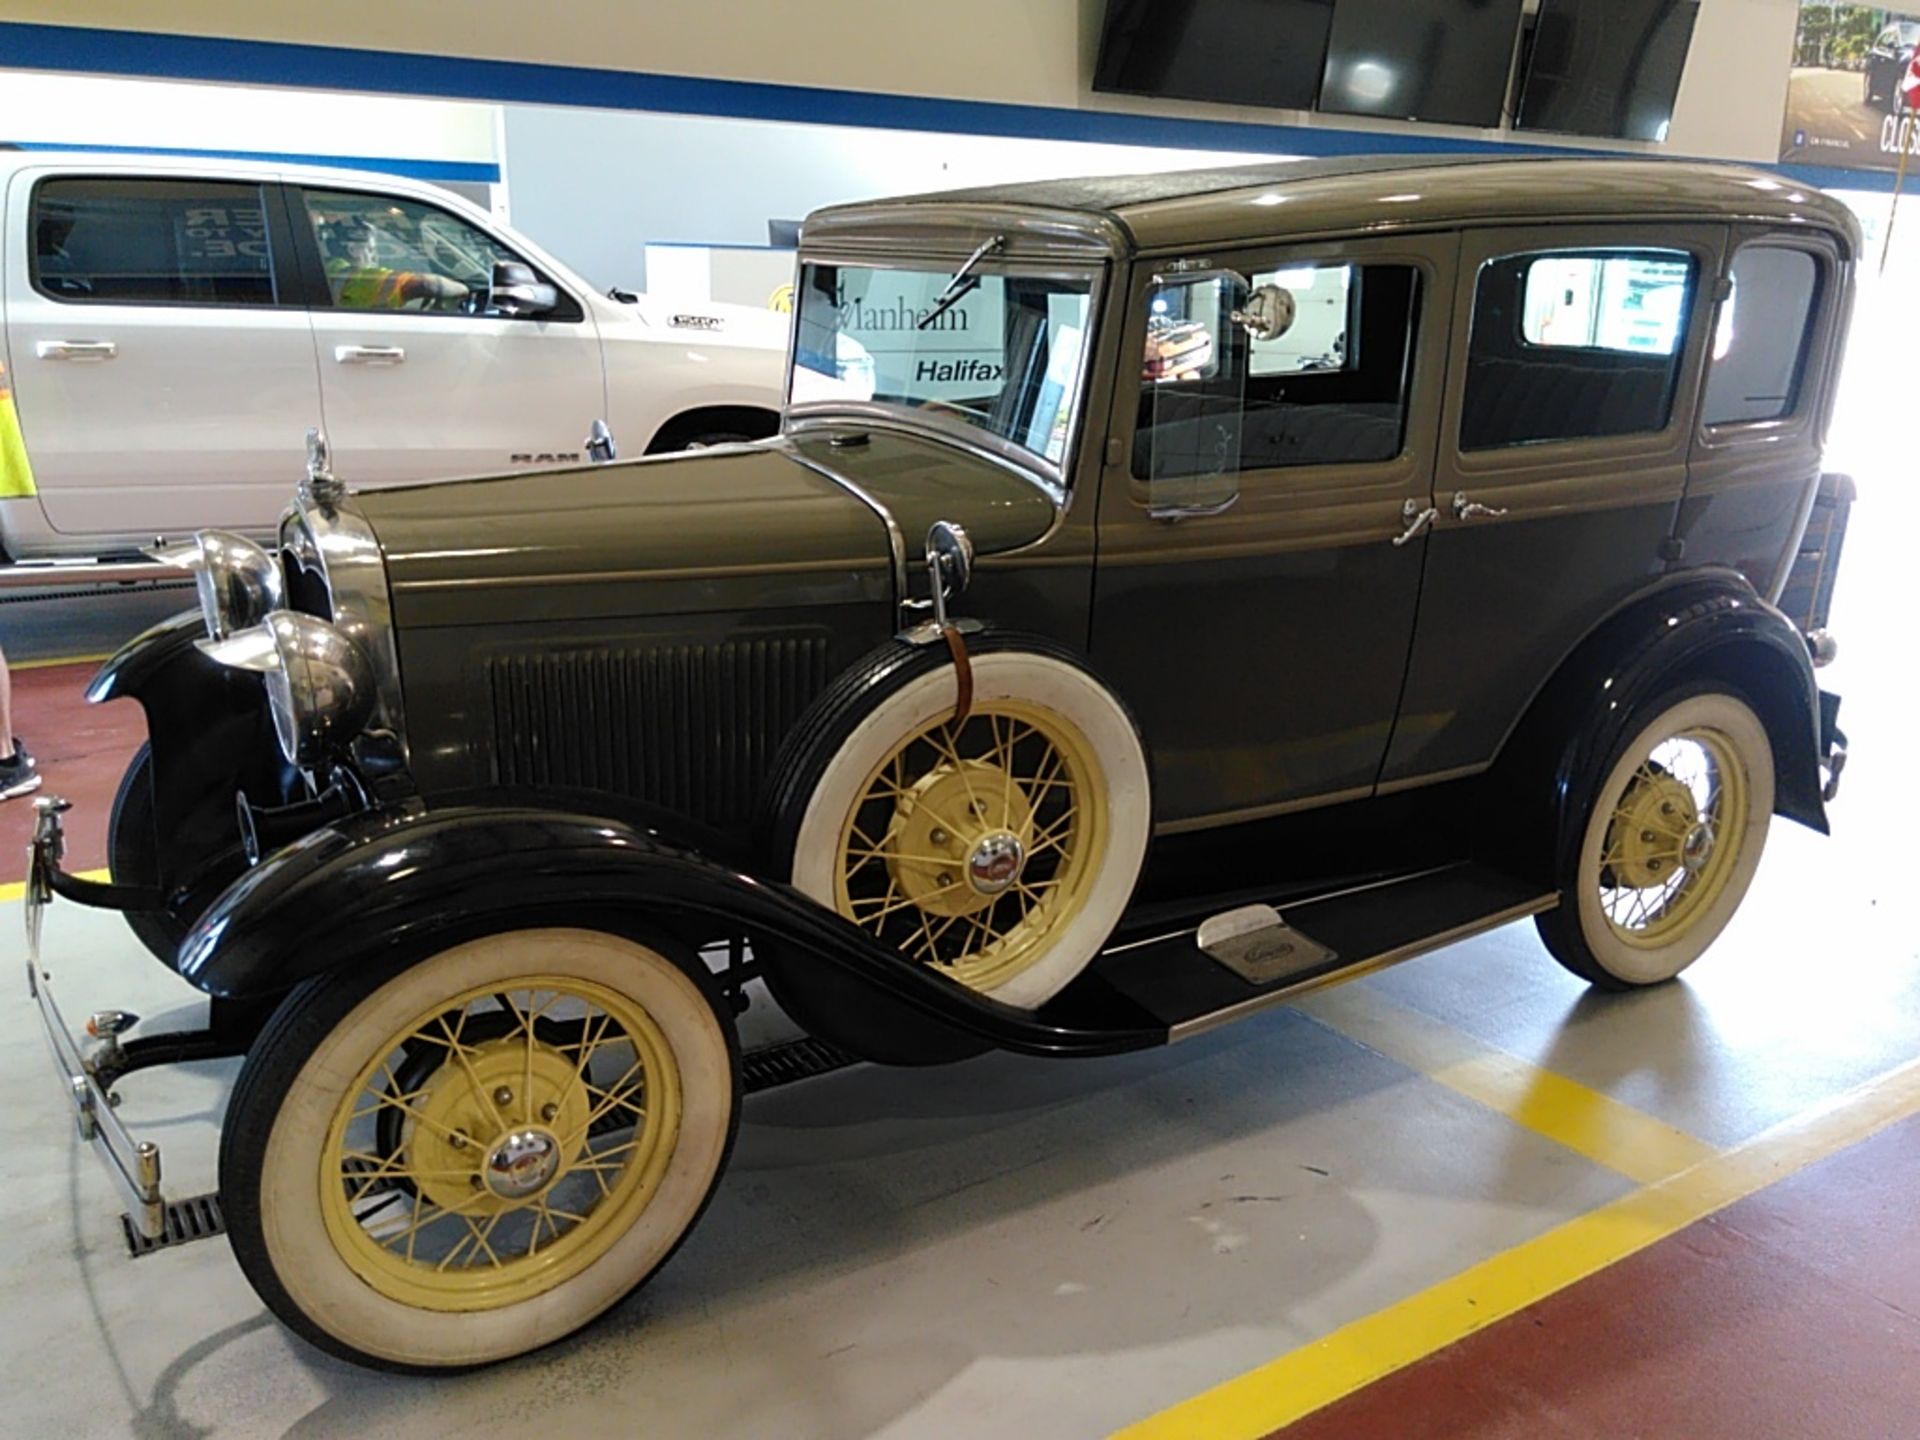 ** ON SALE ** Ford Model A Car 3.3L 4 Cylinder Engine 3 Speed Hard Top '1931 Year' RWD - ONLY 1,731 - Image 2 of 10